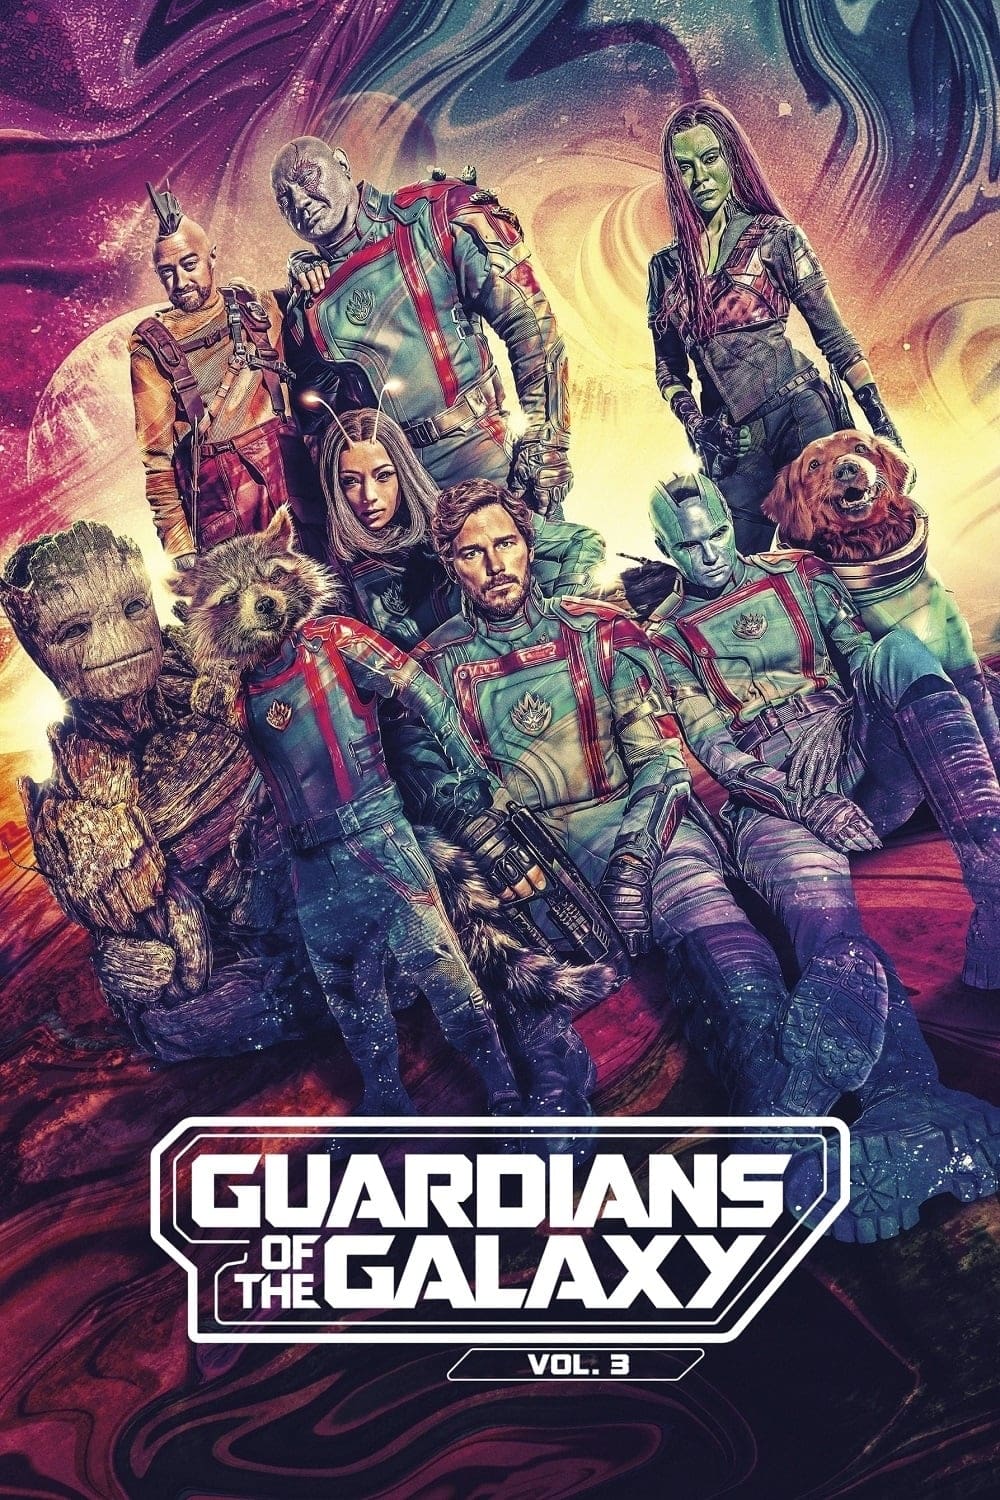 Image Guardians of the Galaxy Volume 3